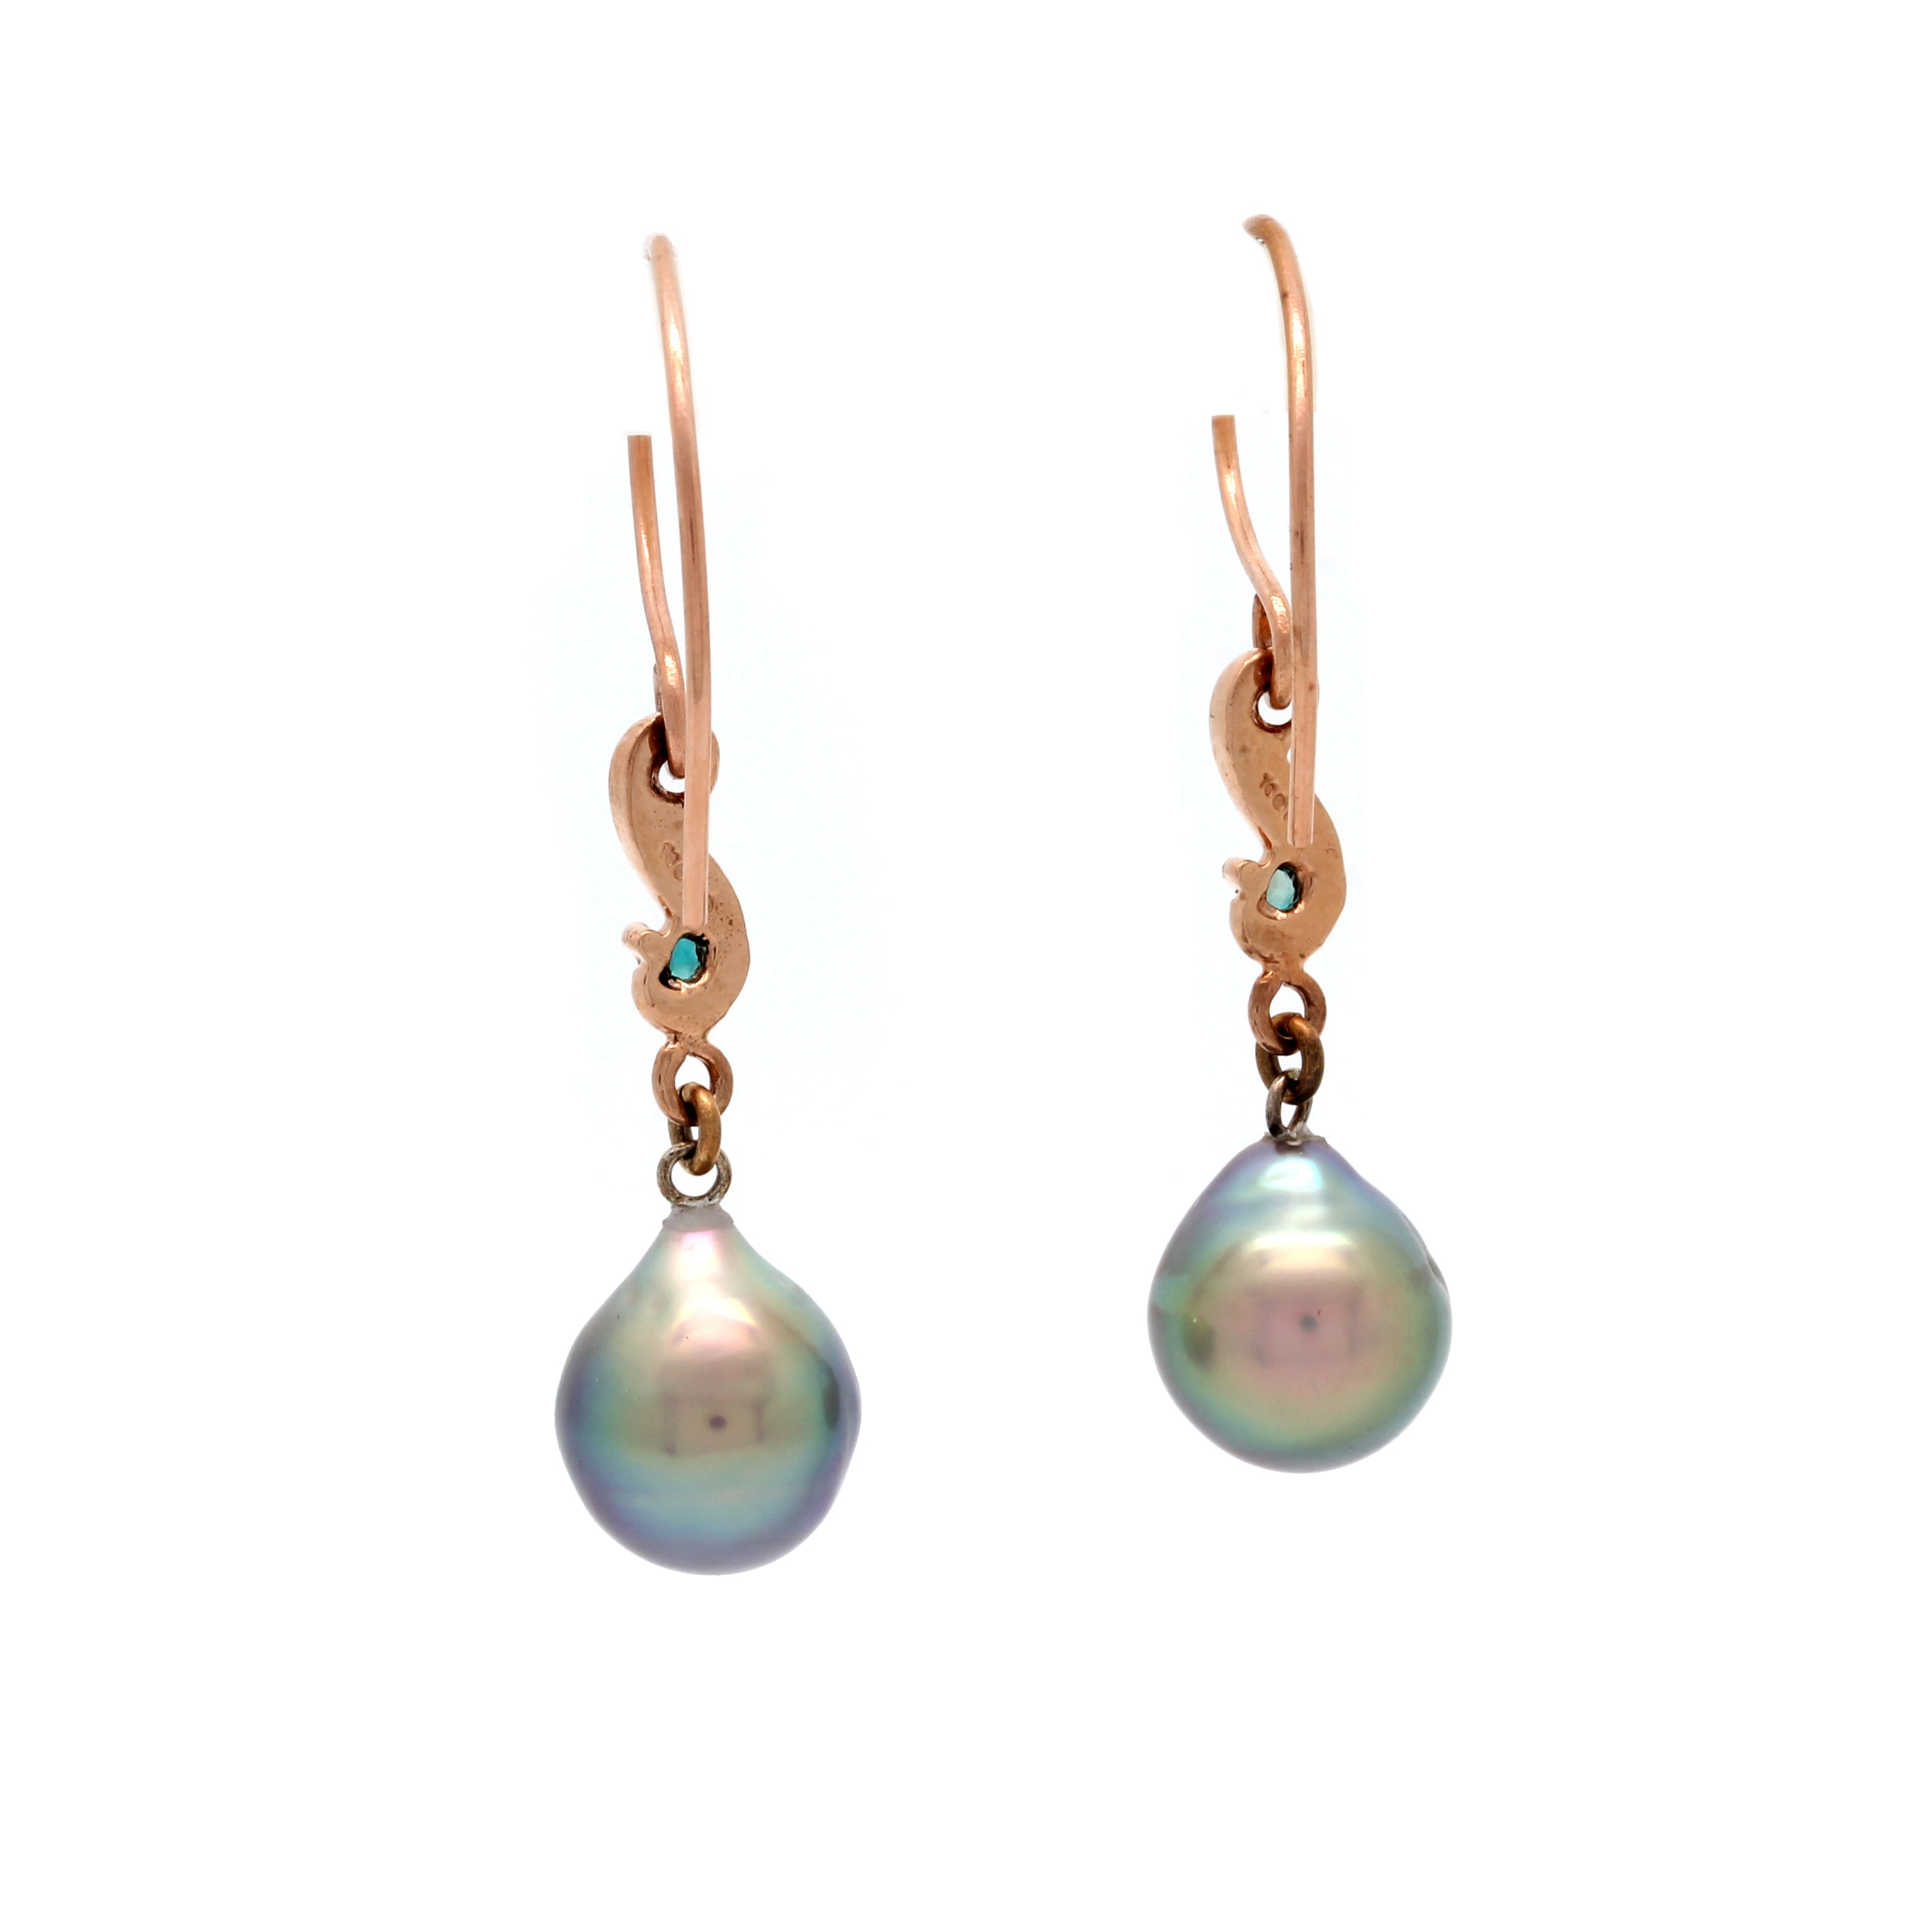 Gorgeous Green Cortez Pearls on 14K Rose Gold Earrings with Green/Blue Lazulite by Kathe Mai